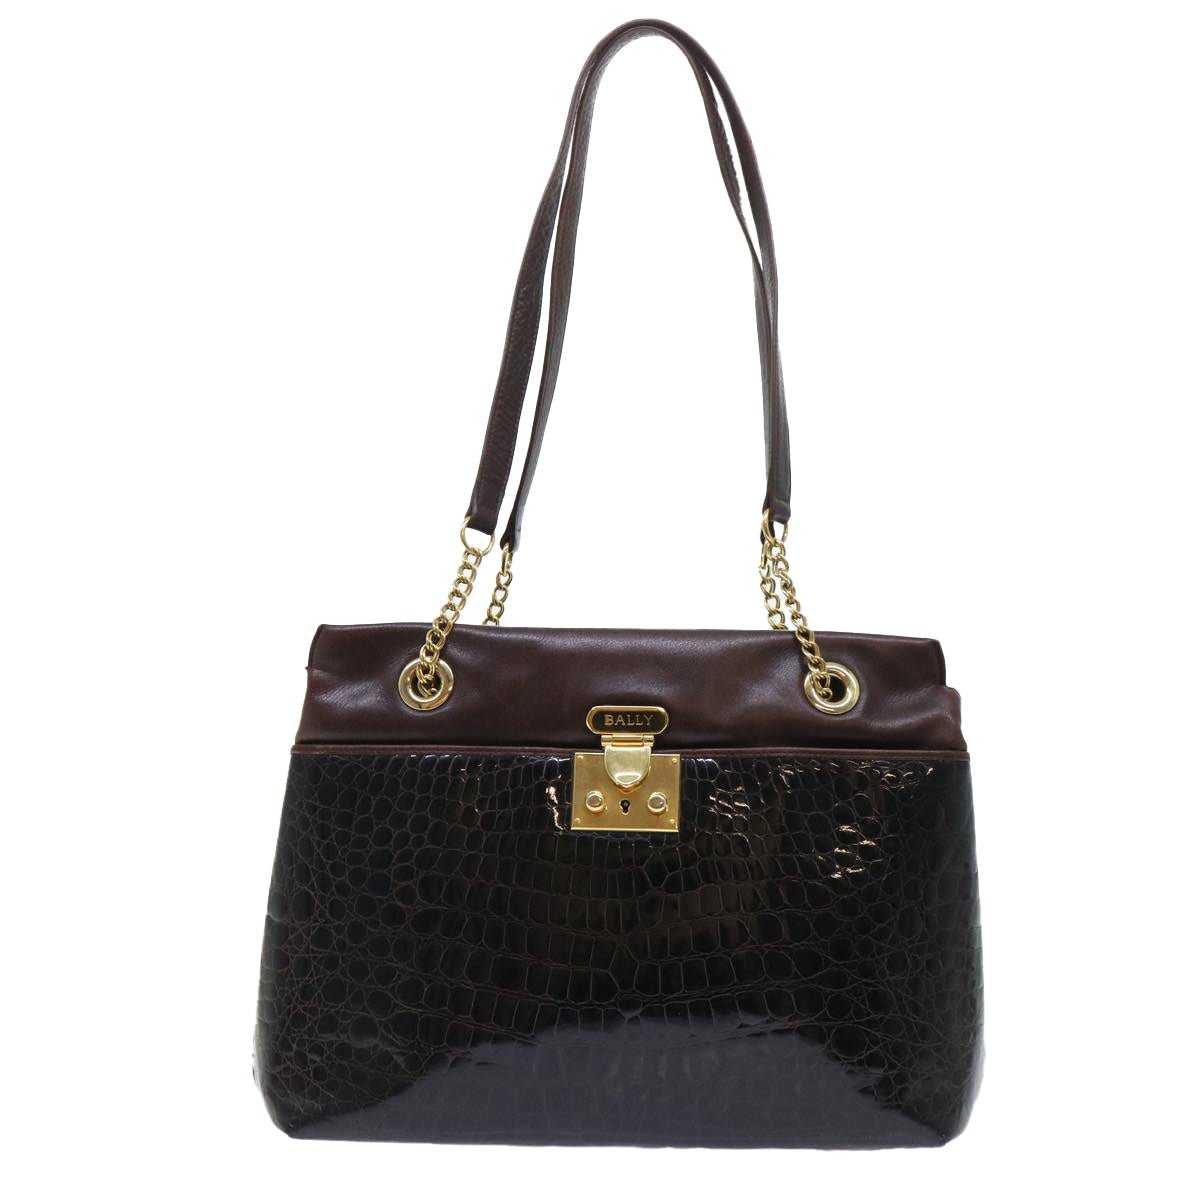 BALLY Shoulder Bag Leather Brown Auth bs7832